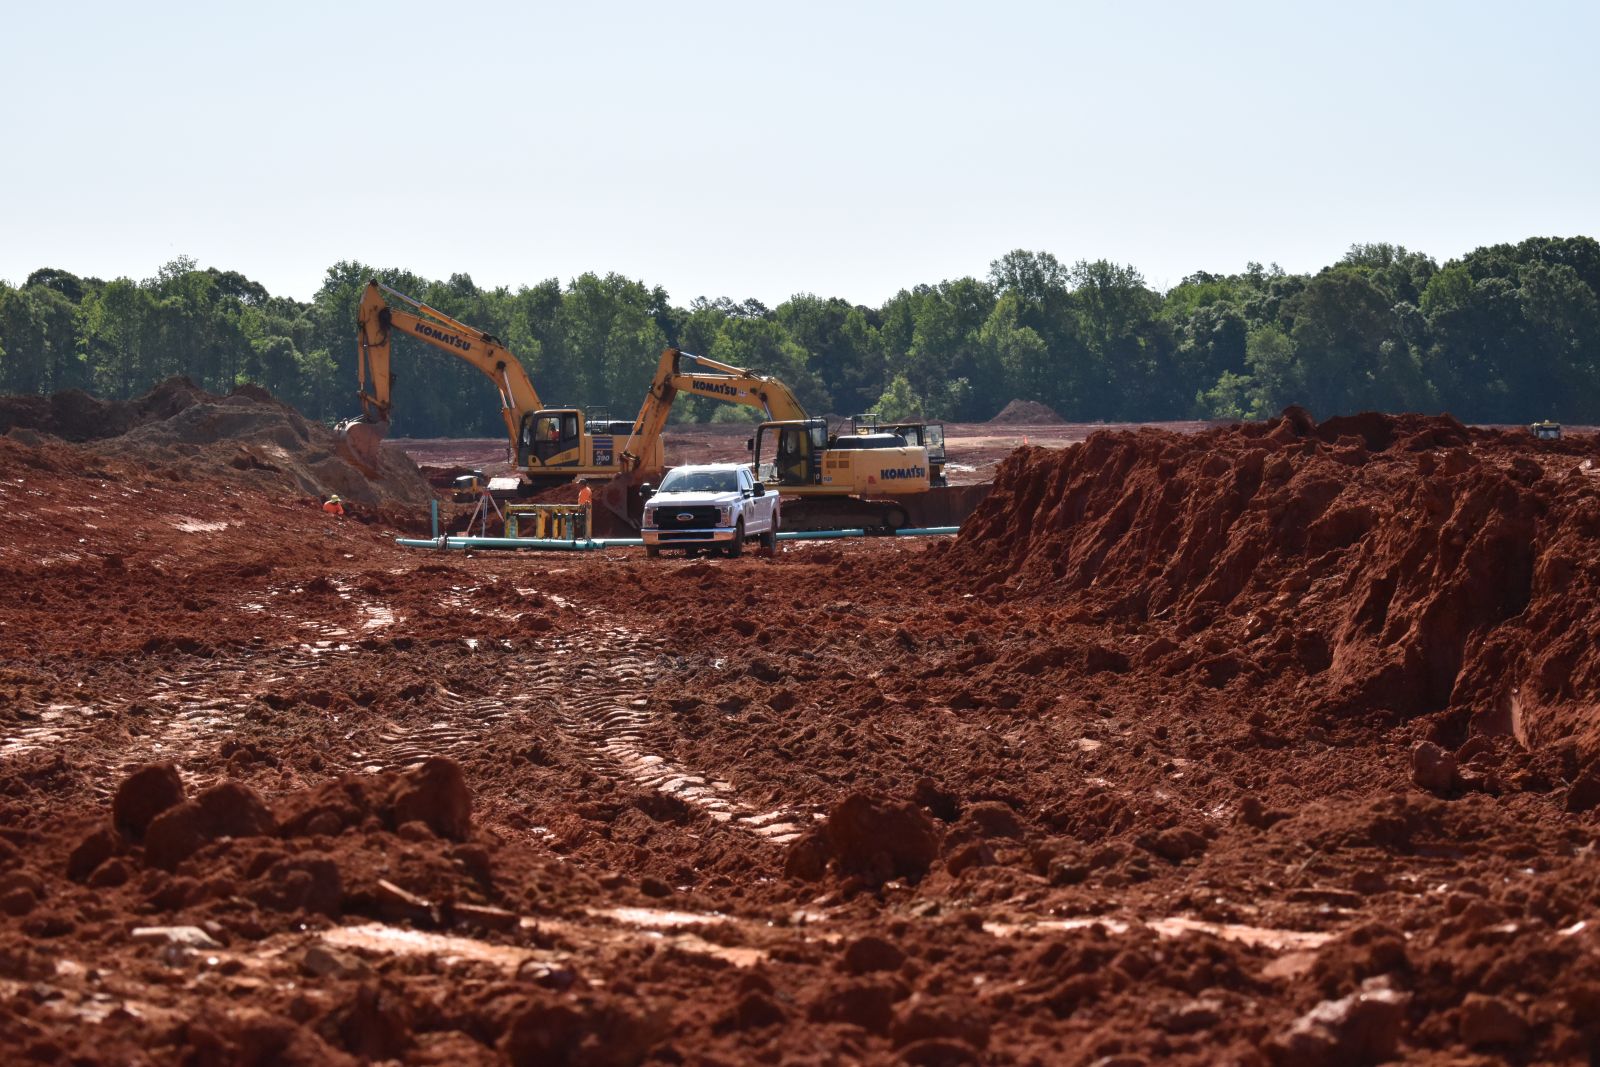 Vermeer's finished plant at the South Greenville Enterprise Park is expected in 2021. (Photo/Molly Hulsey)